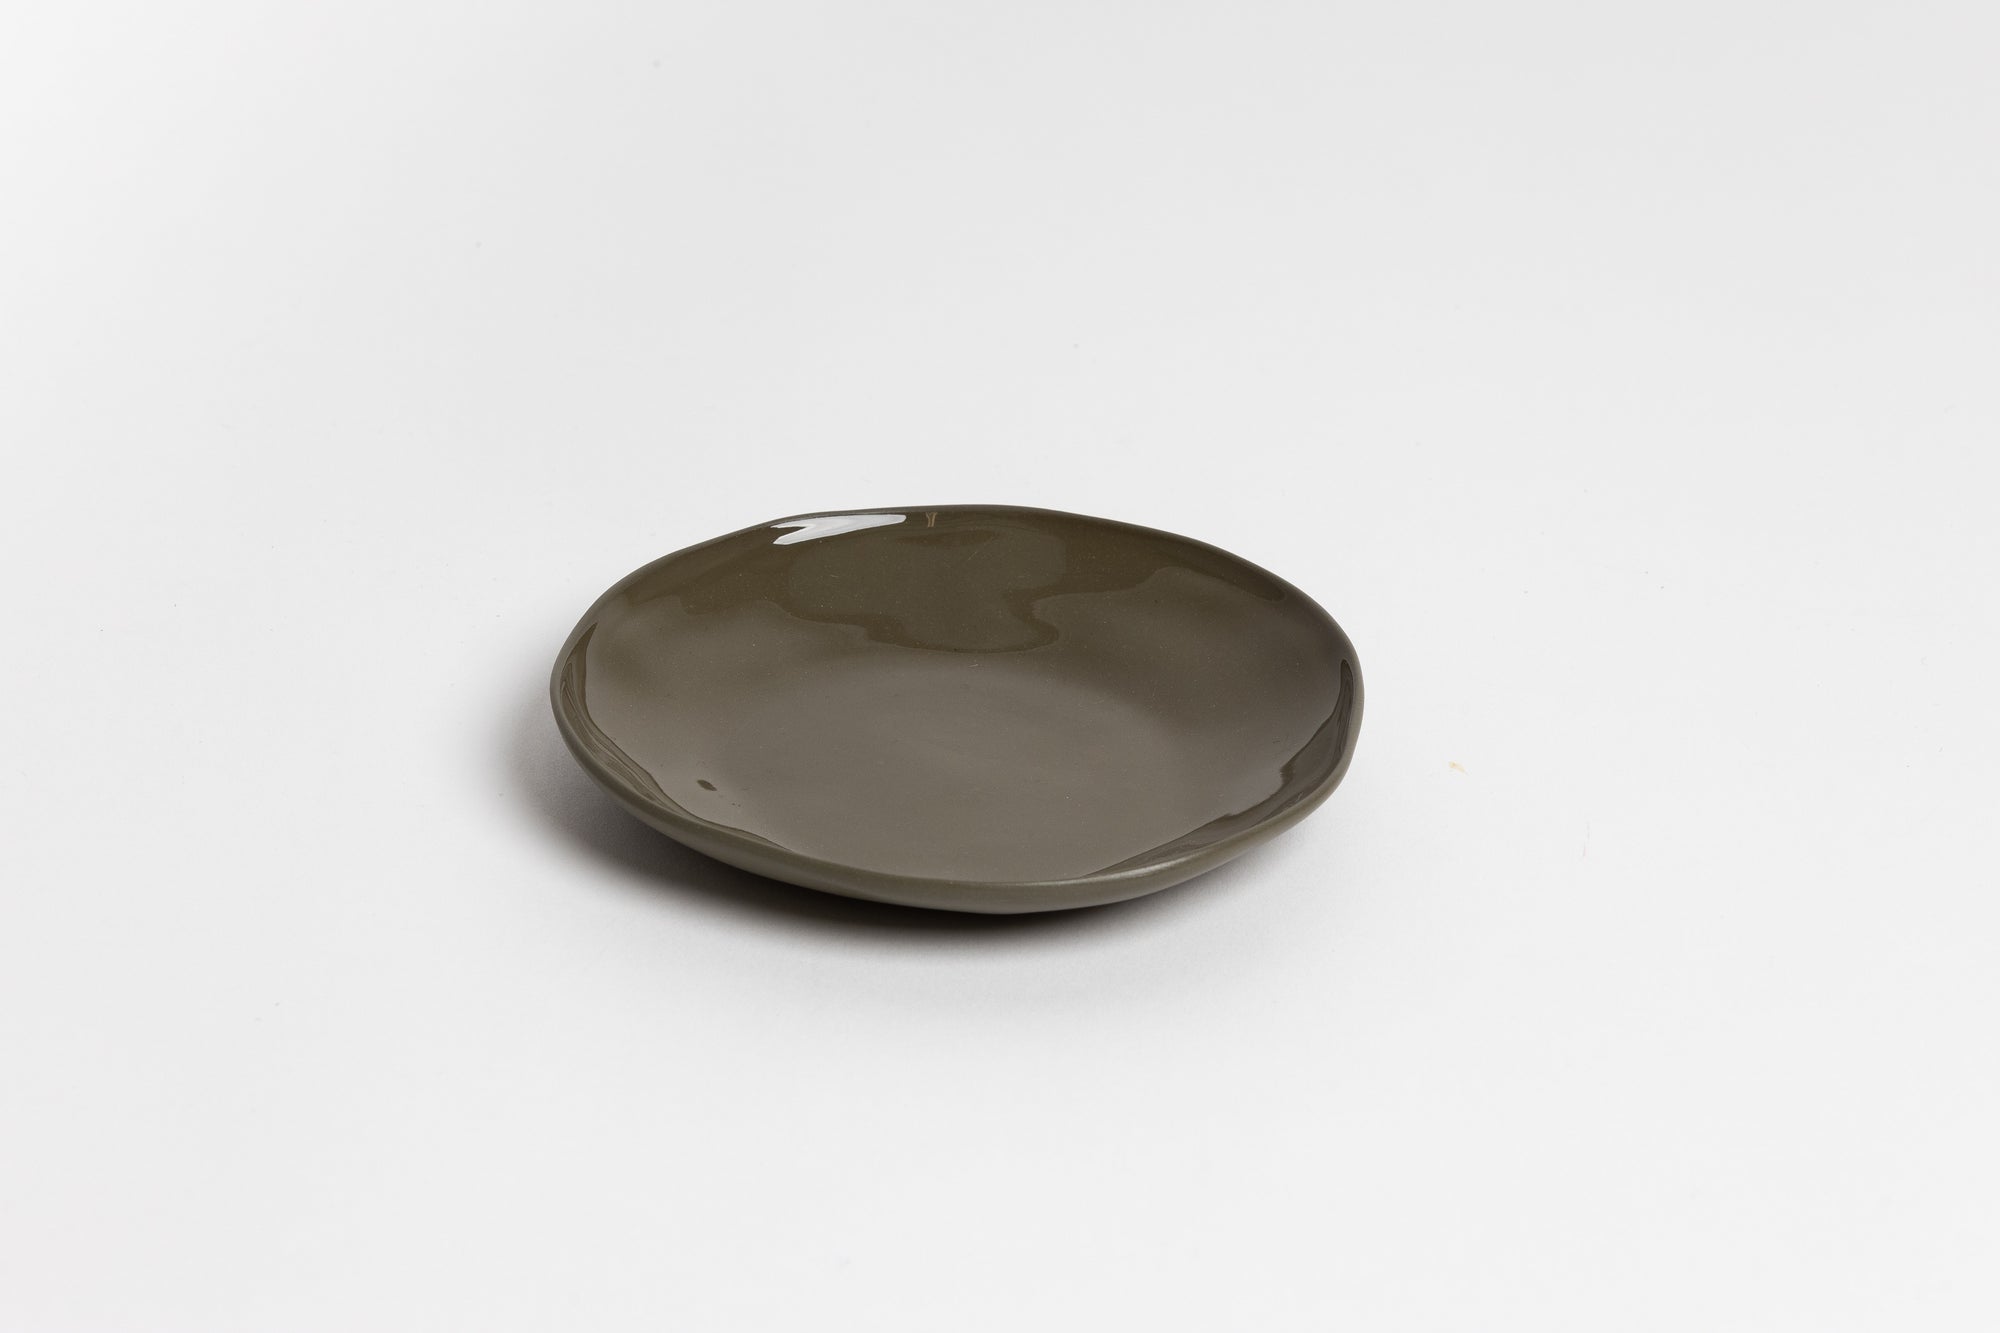 Ned Haan Round Dish 13cm - Olive Green